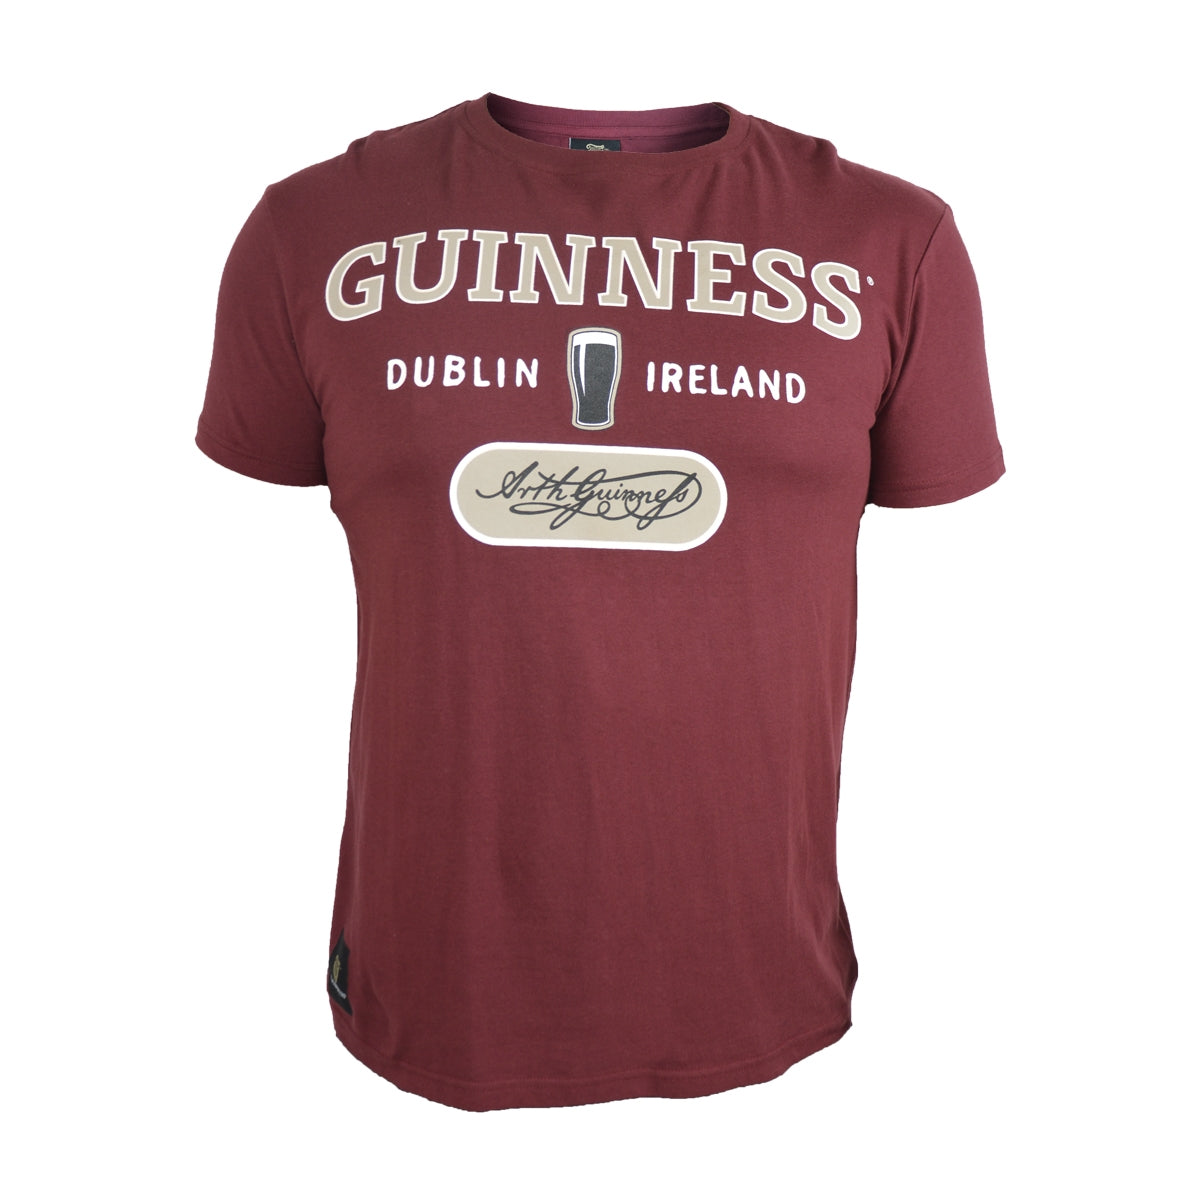 Guinness Signature Burgundy Trademark Label Tee featuring the Guinness brand.